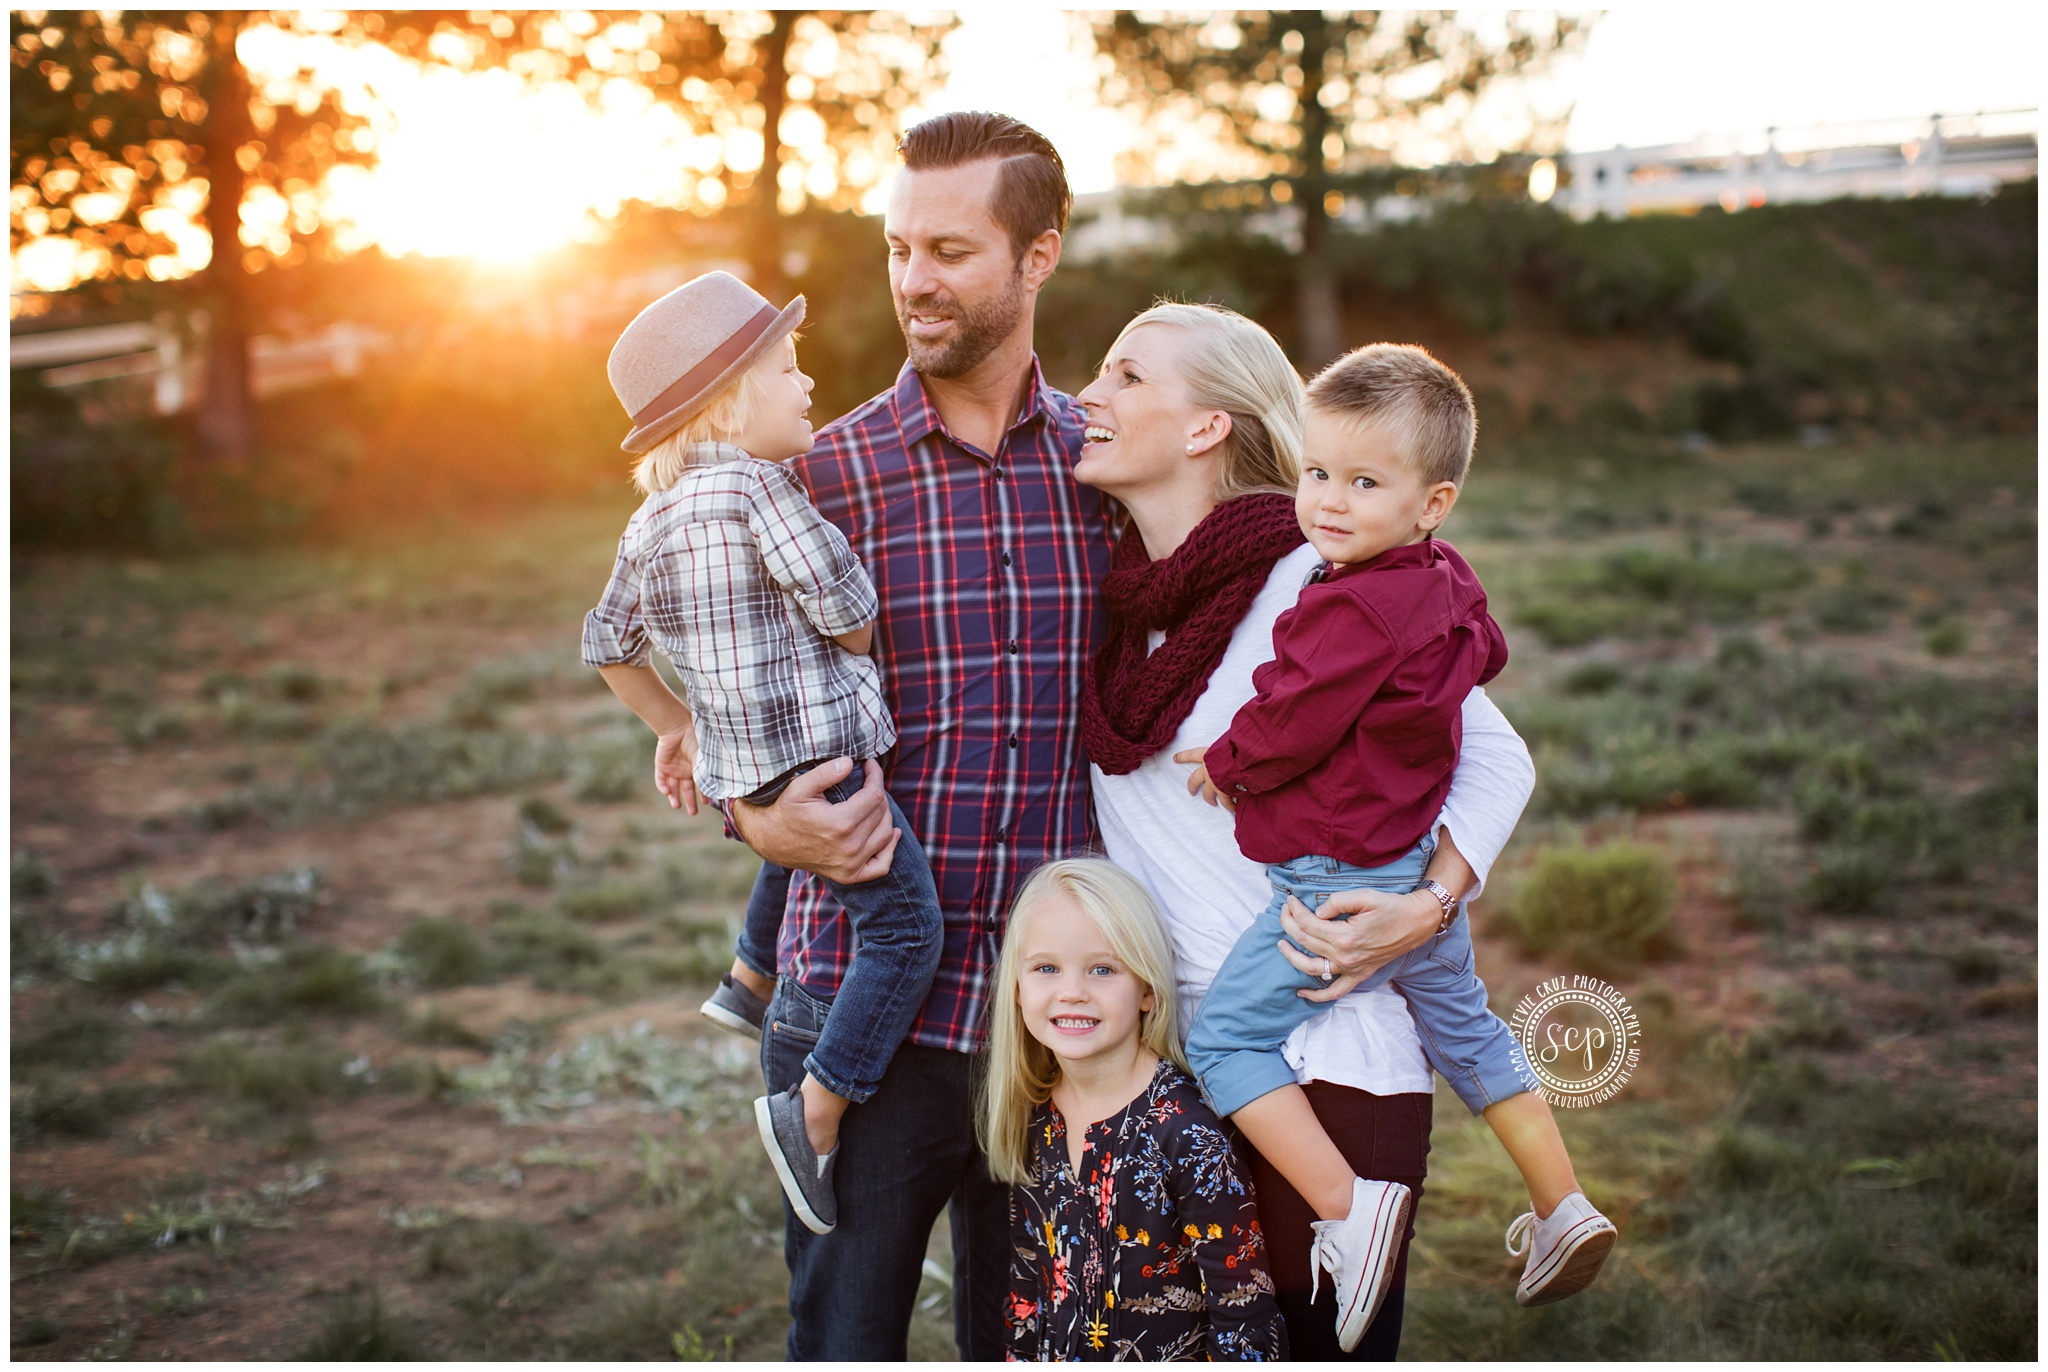 Casual lifestyle family photo sessions by Stevie Cruz Photography, best Orange county photographer